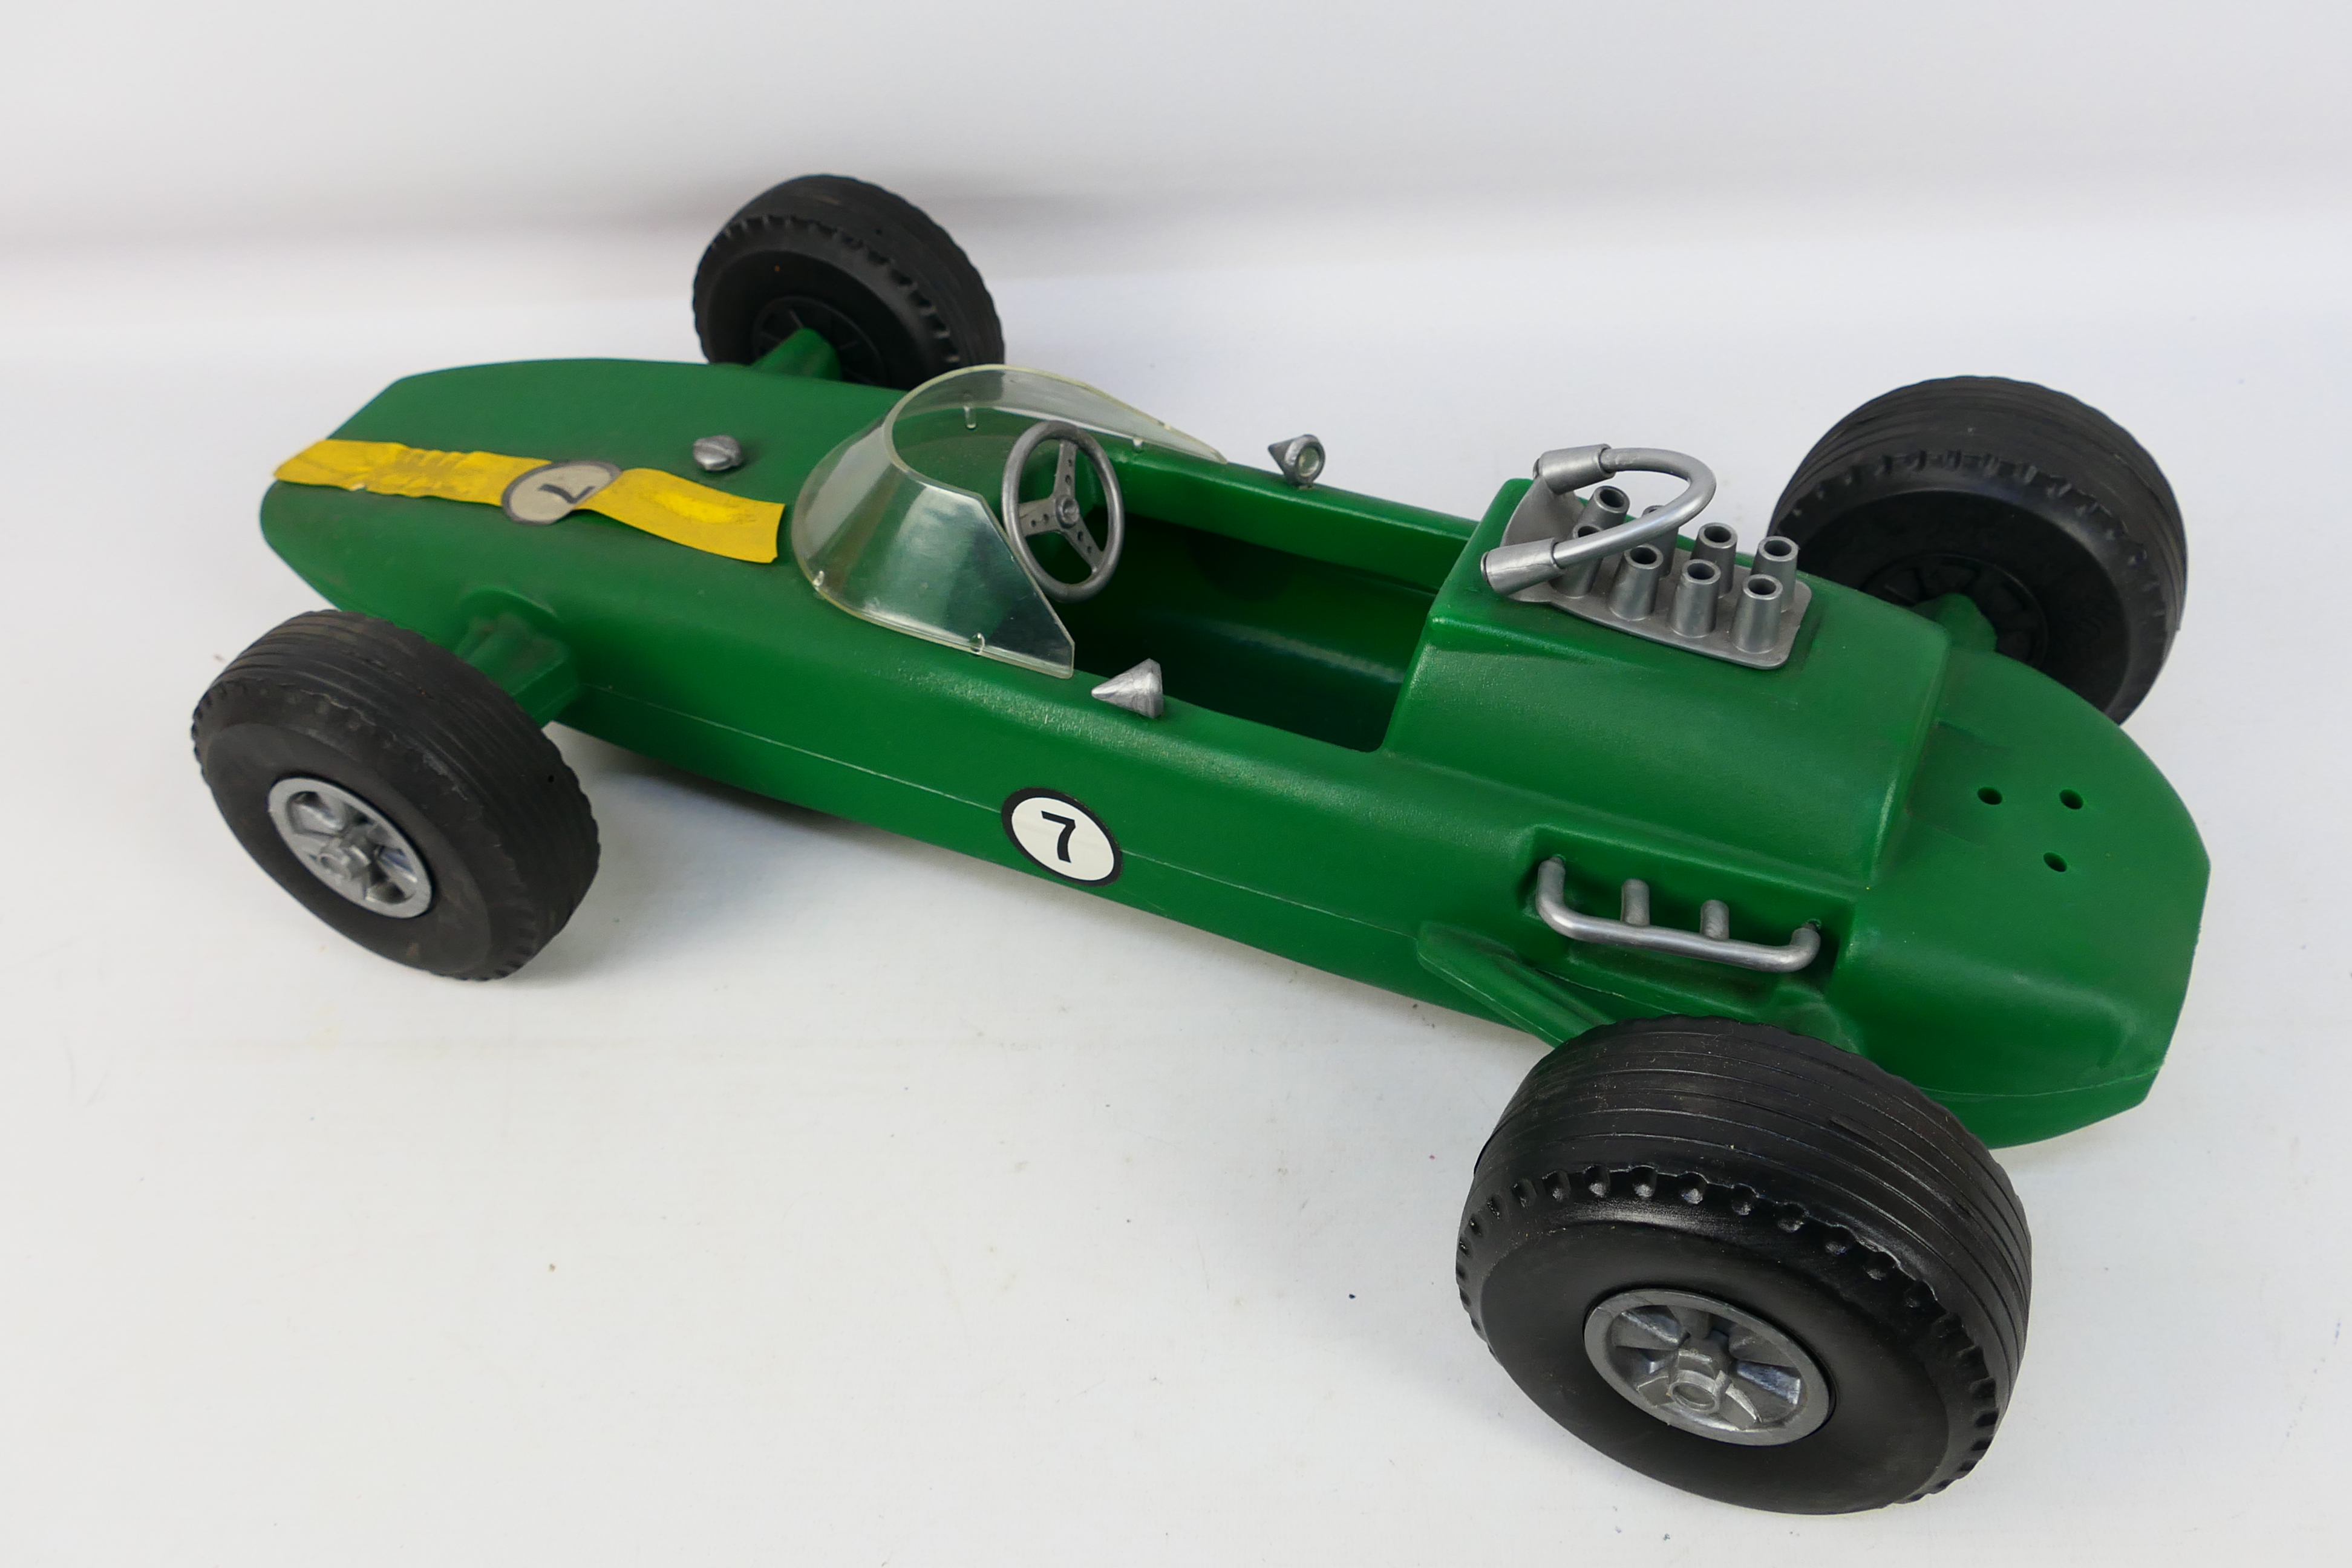 Palitoy - Action Man - An Action Man Grange Prix Racing Car (#34810) 60cm long This item is the car - Image 3 of 9